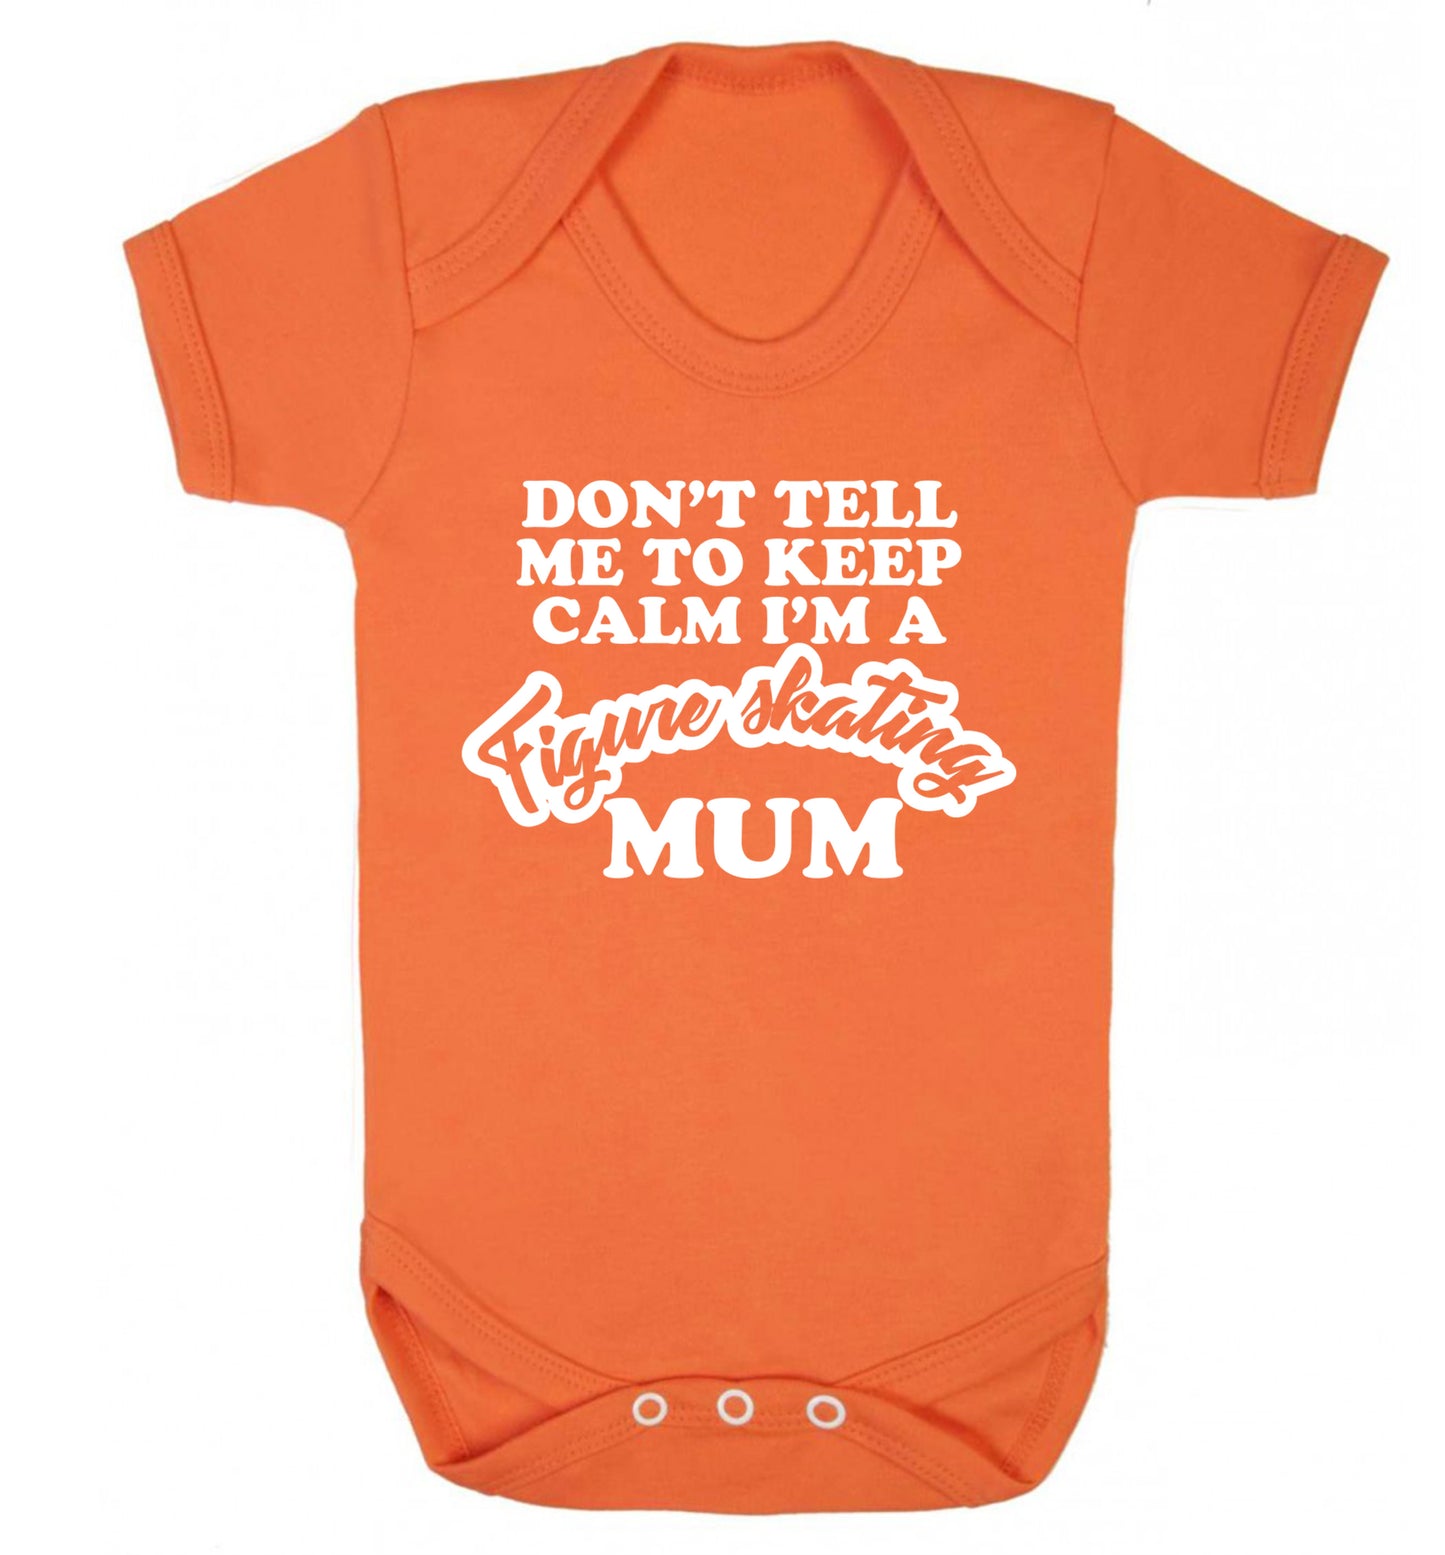 Don't tell me to keep calm I'm a figure skating mum Baby Vest orange 18-24 months